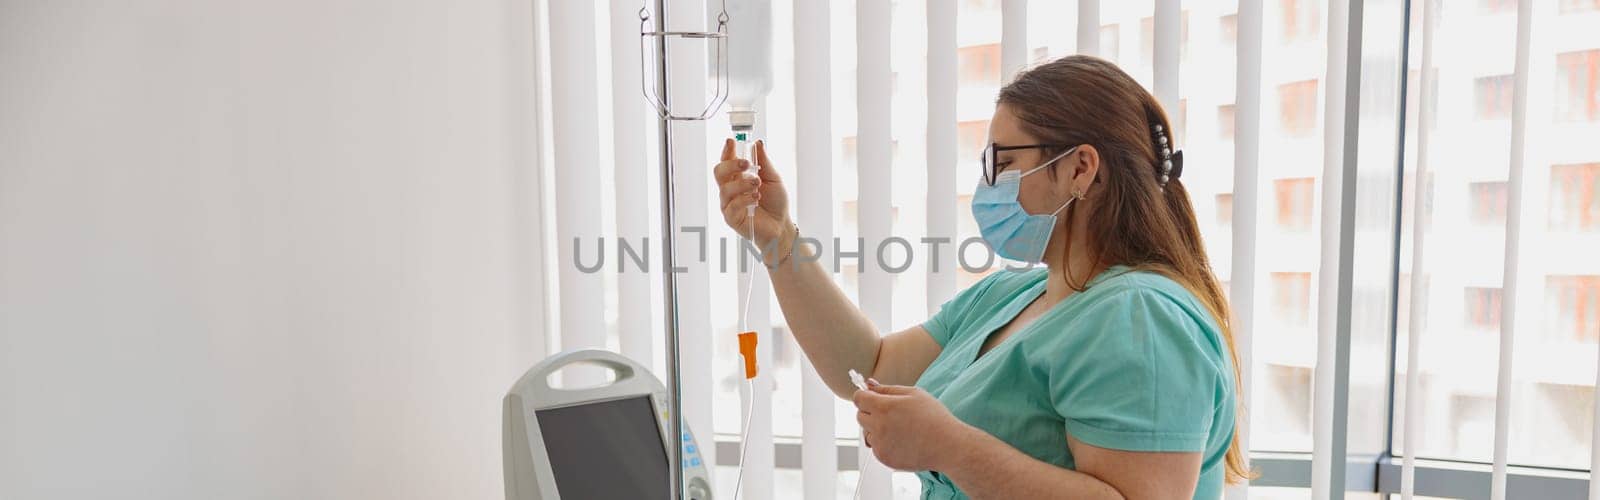 Nurse in mask controls drip of her patient during Covid-19 epidemic by Yaroslav_astakhov